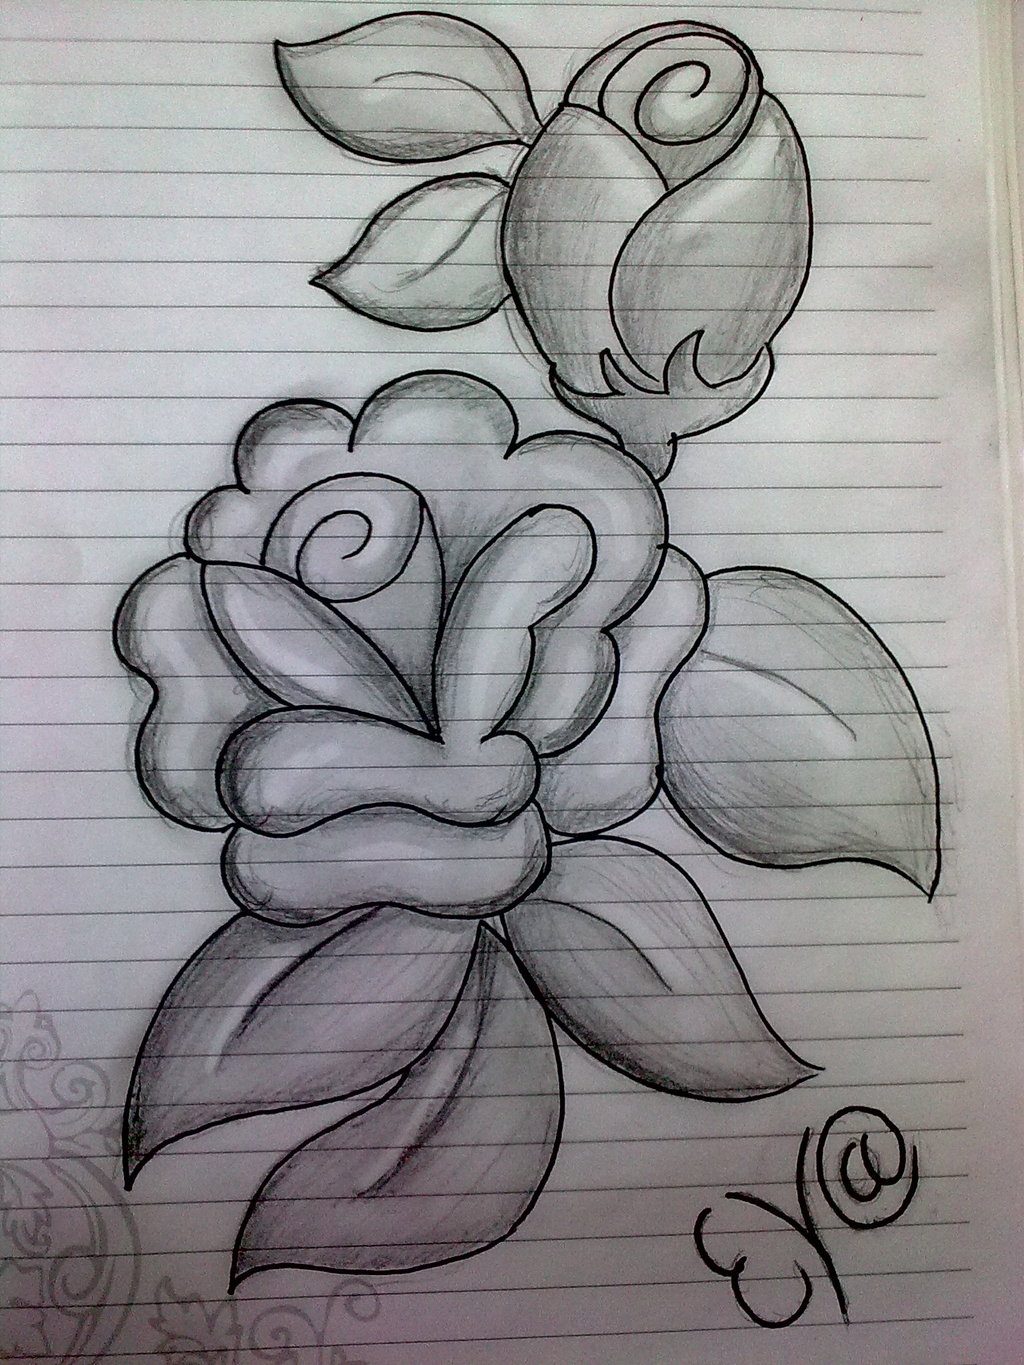 Free Drawings Of Flowers In Black And White Download Free Drawings Of